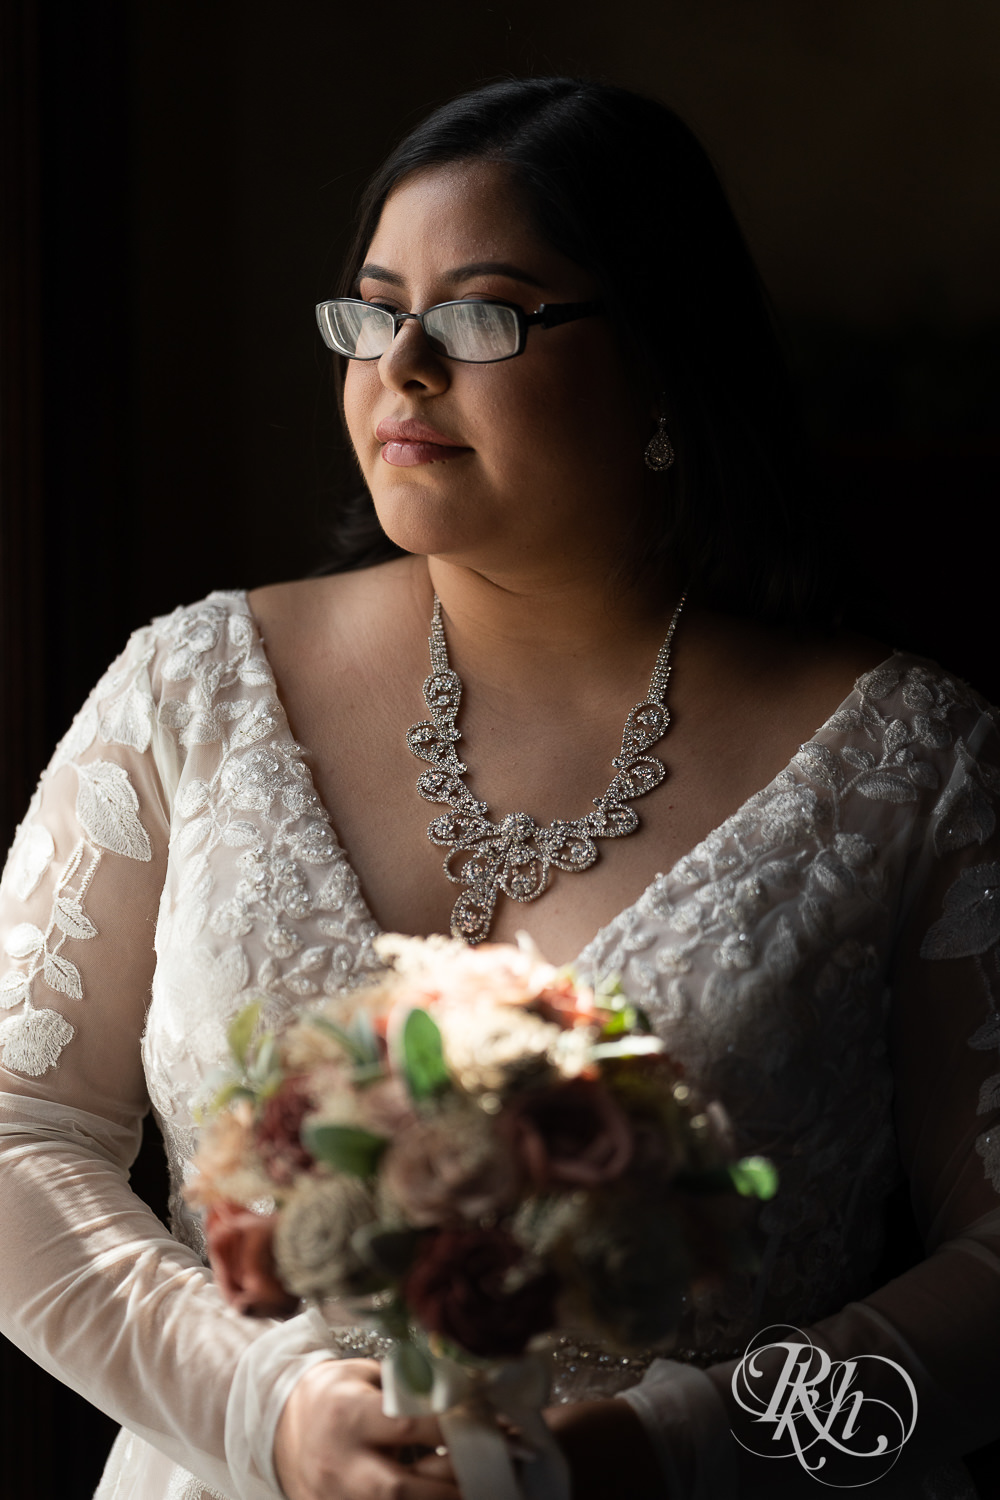 Mexican bride at the Historic Concord Exchange in Saint Paul, Minnesota.